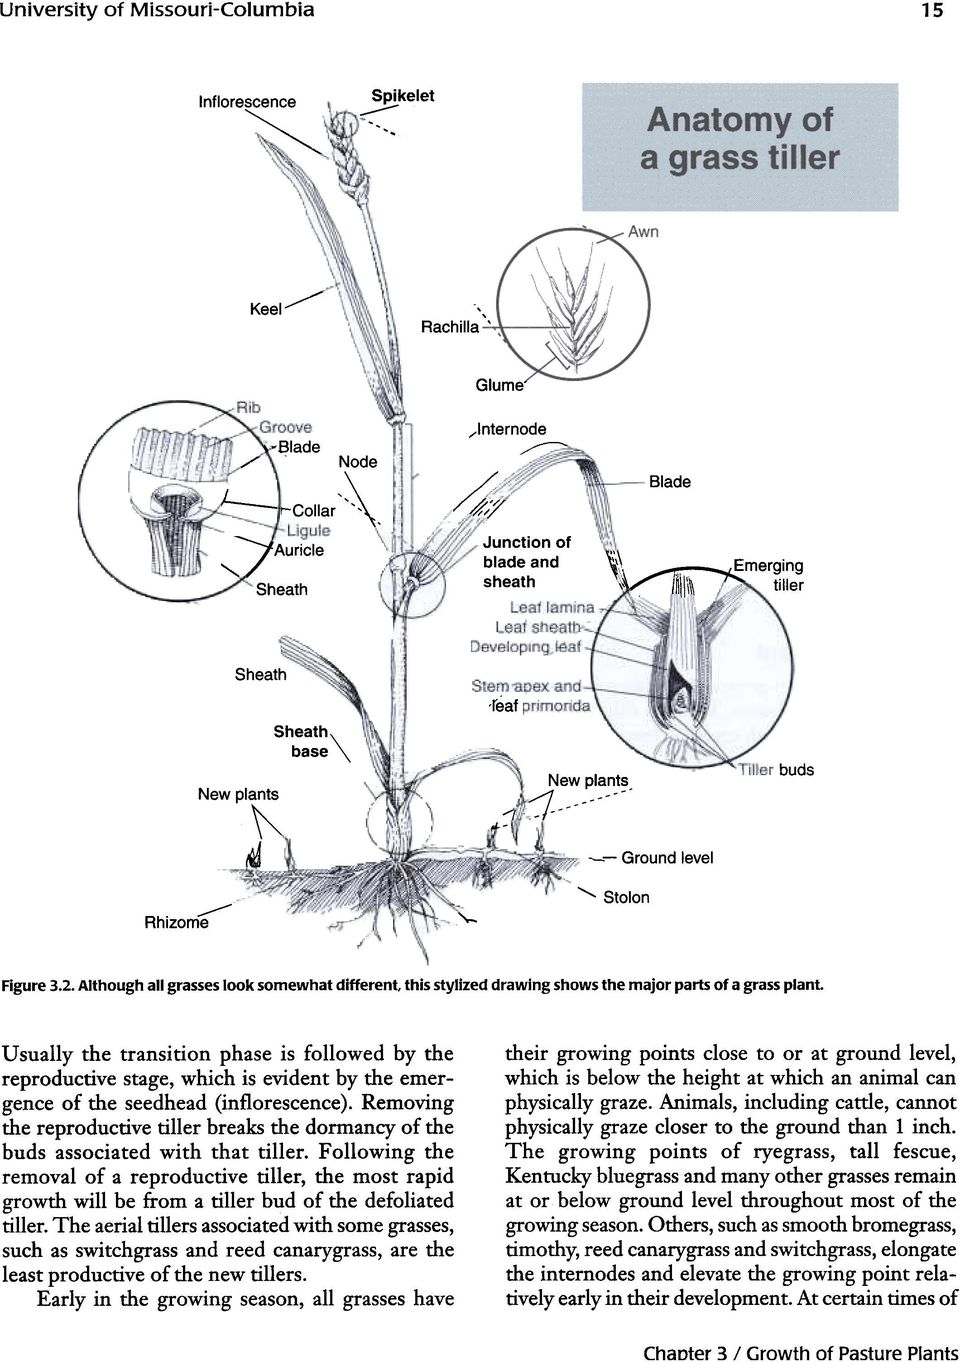 Although all grasses look somewhat different this stylized drawing shows the major parts of a grass plant.